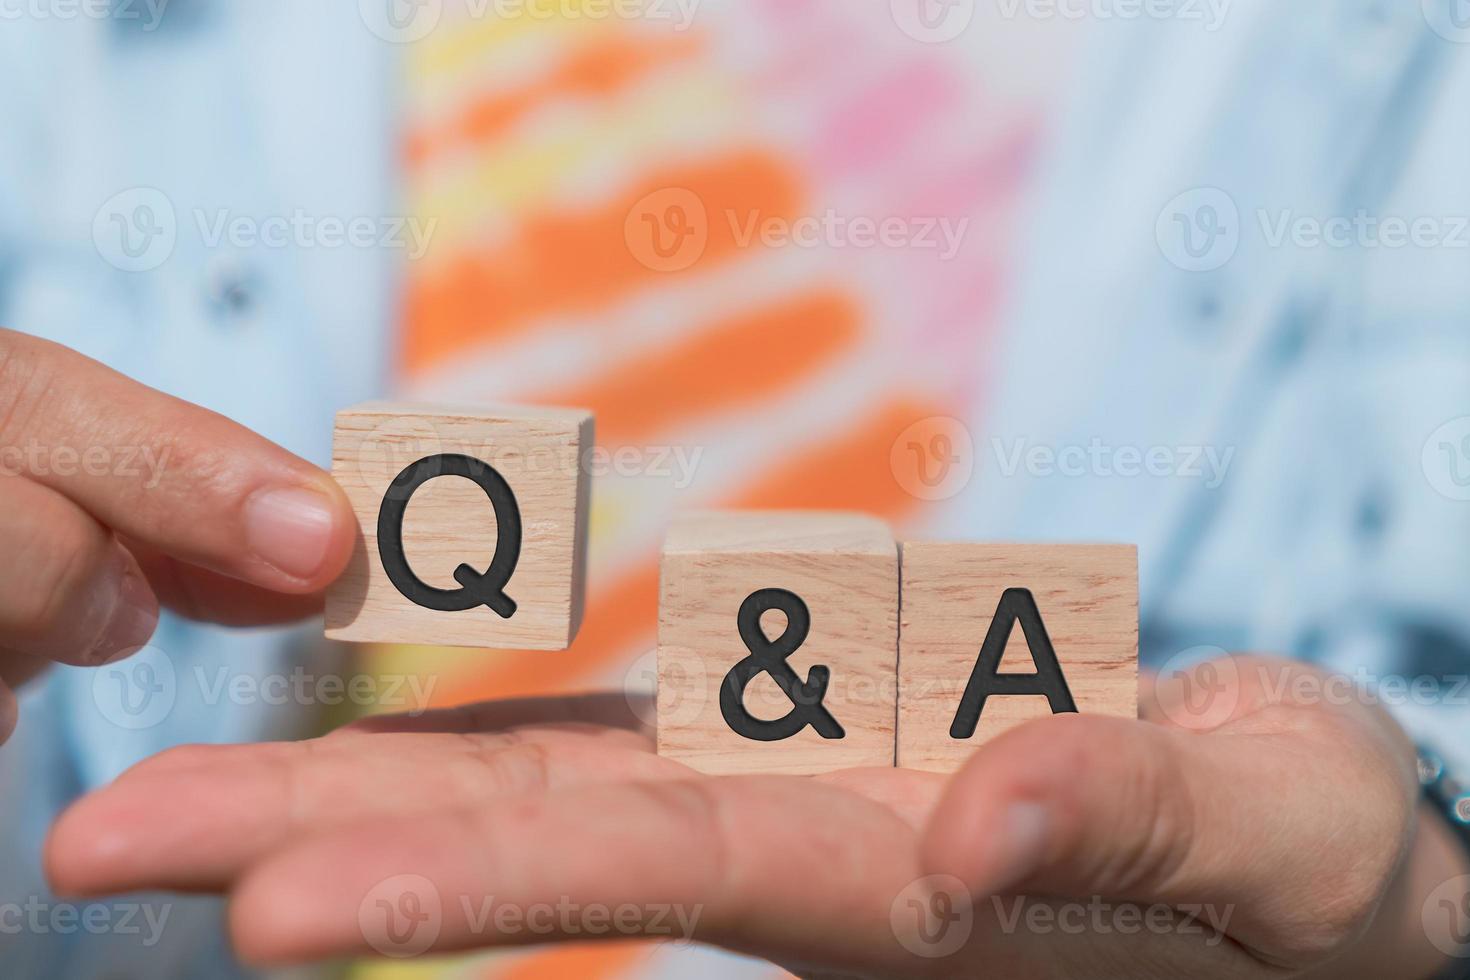 Q and A alphabet on wooden cube in hand hold with background photo